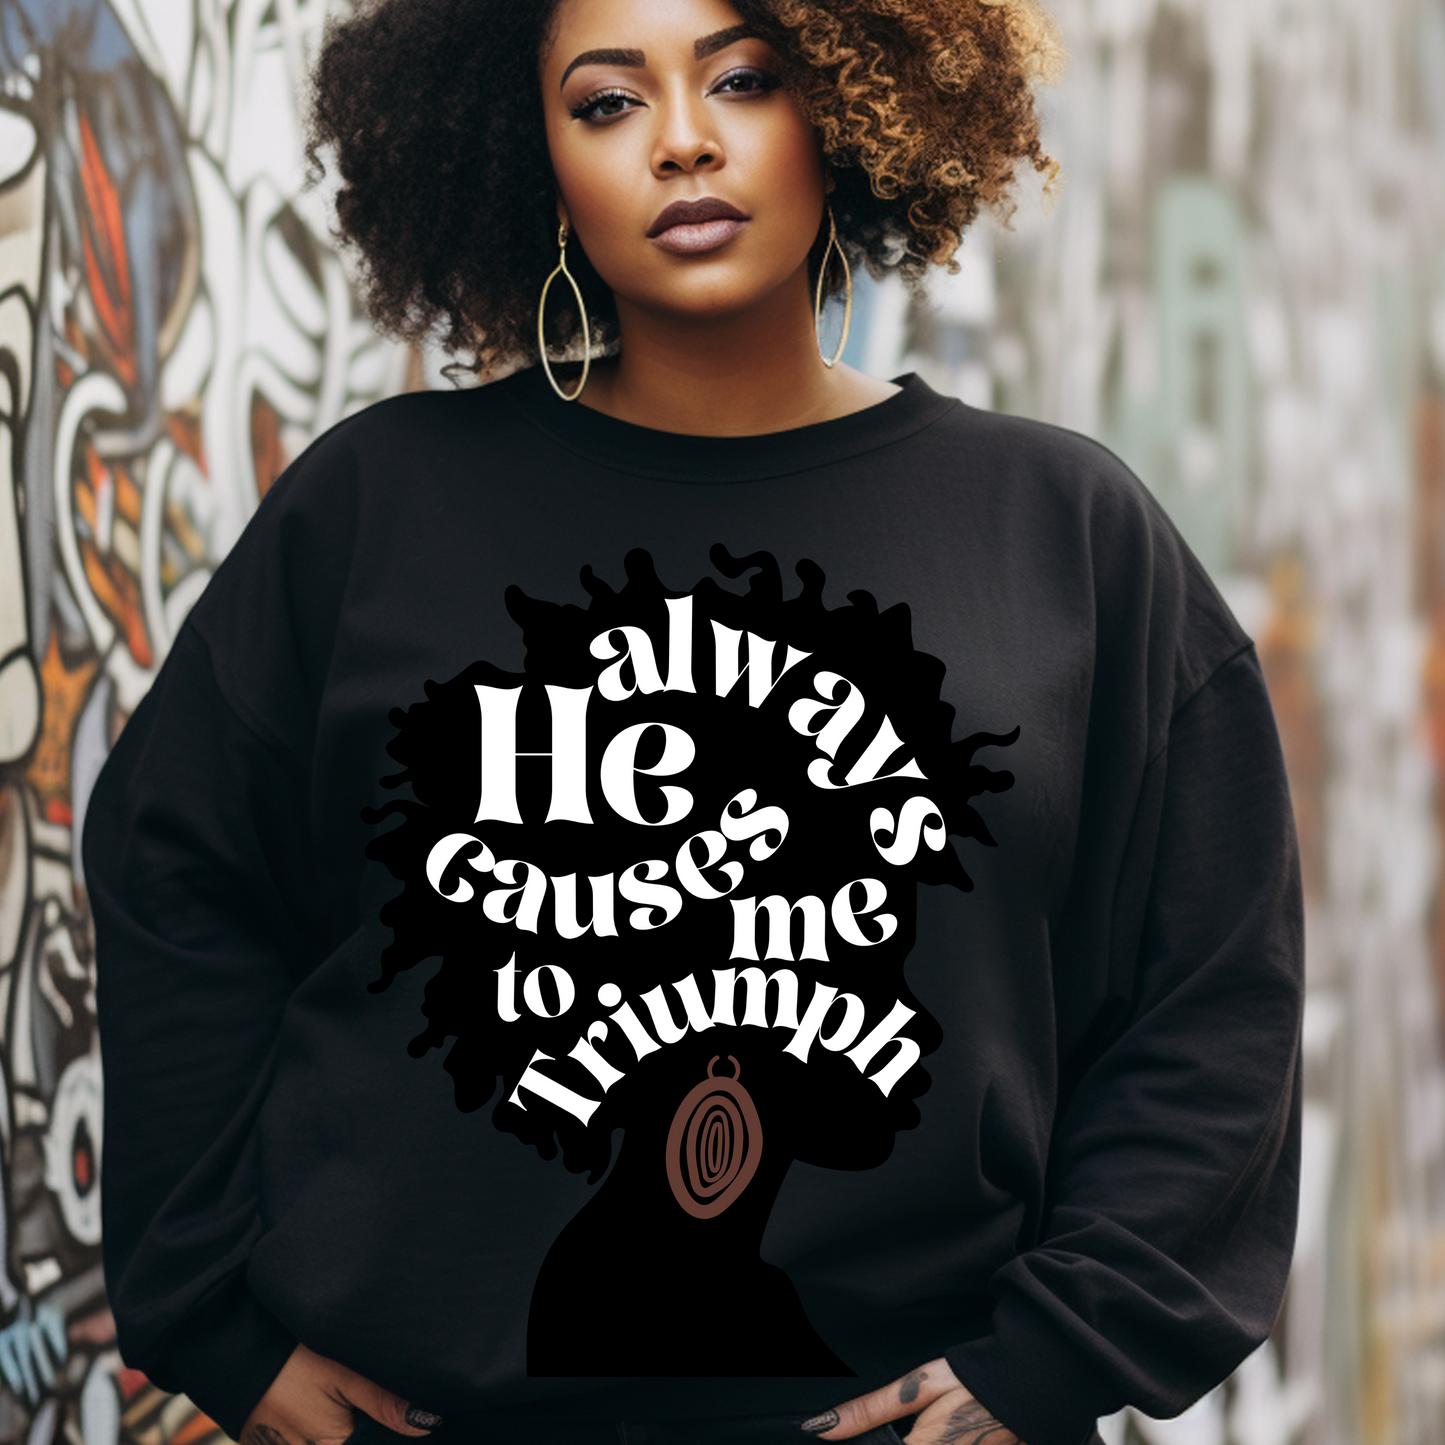 Triumph Tees Faith Apparel: Inspiring black sweatshirt with 'He always causes me to triumph' design. Elevate your style with this faith-inspired Triumph Tees black sweatshirt. Perfect for spreading the gospel and celebrating black history. #TriumphTees #FaithApparel #BlackHistoryShirt